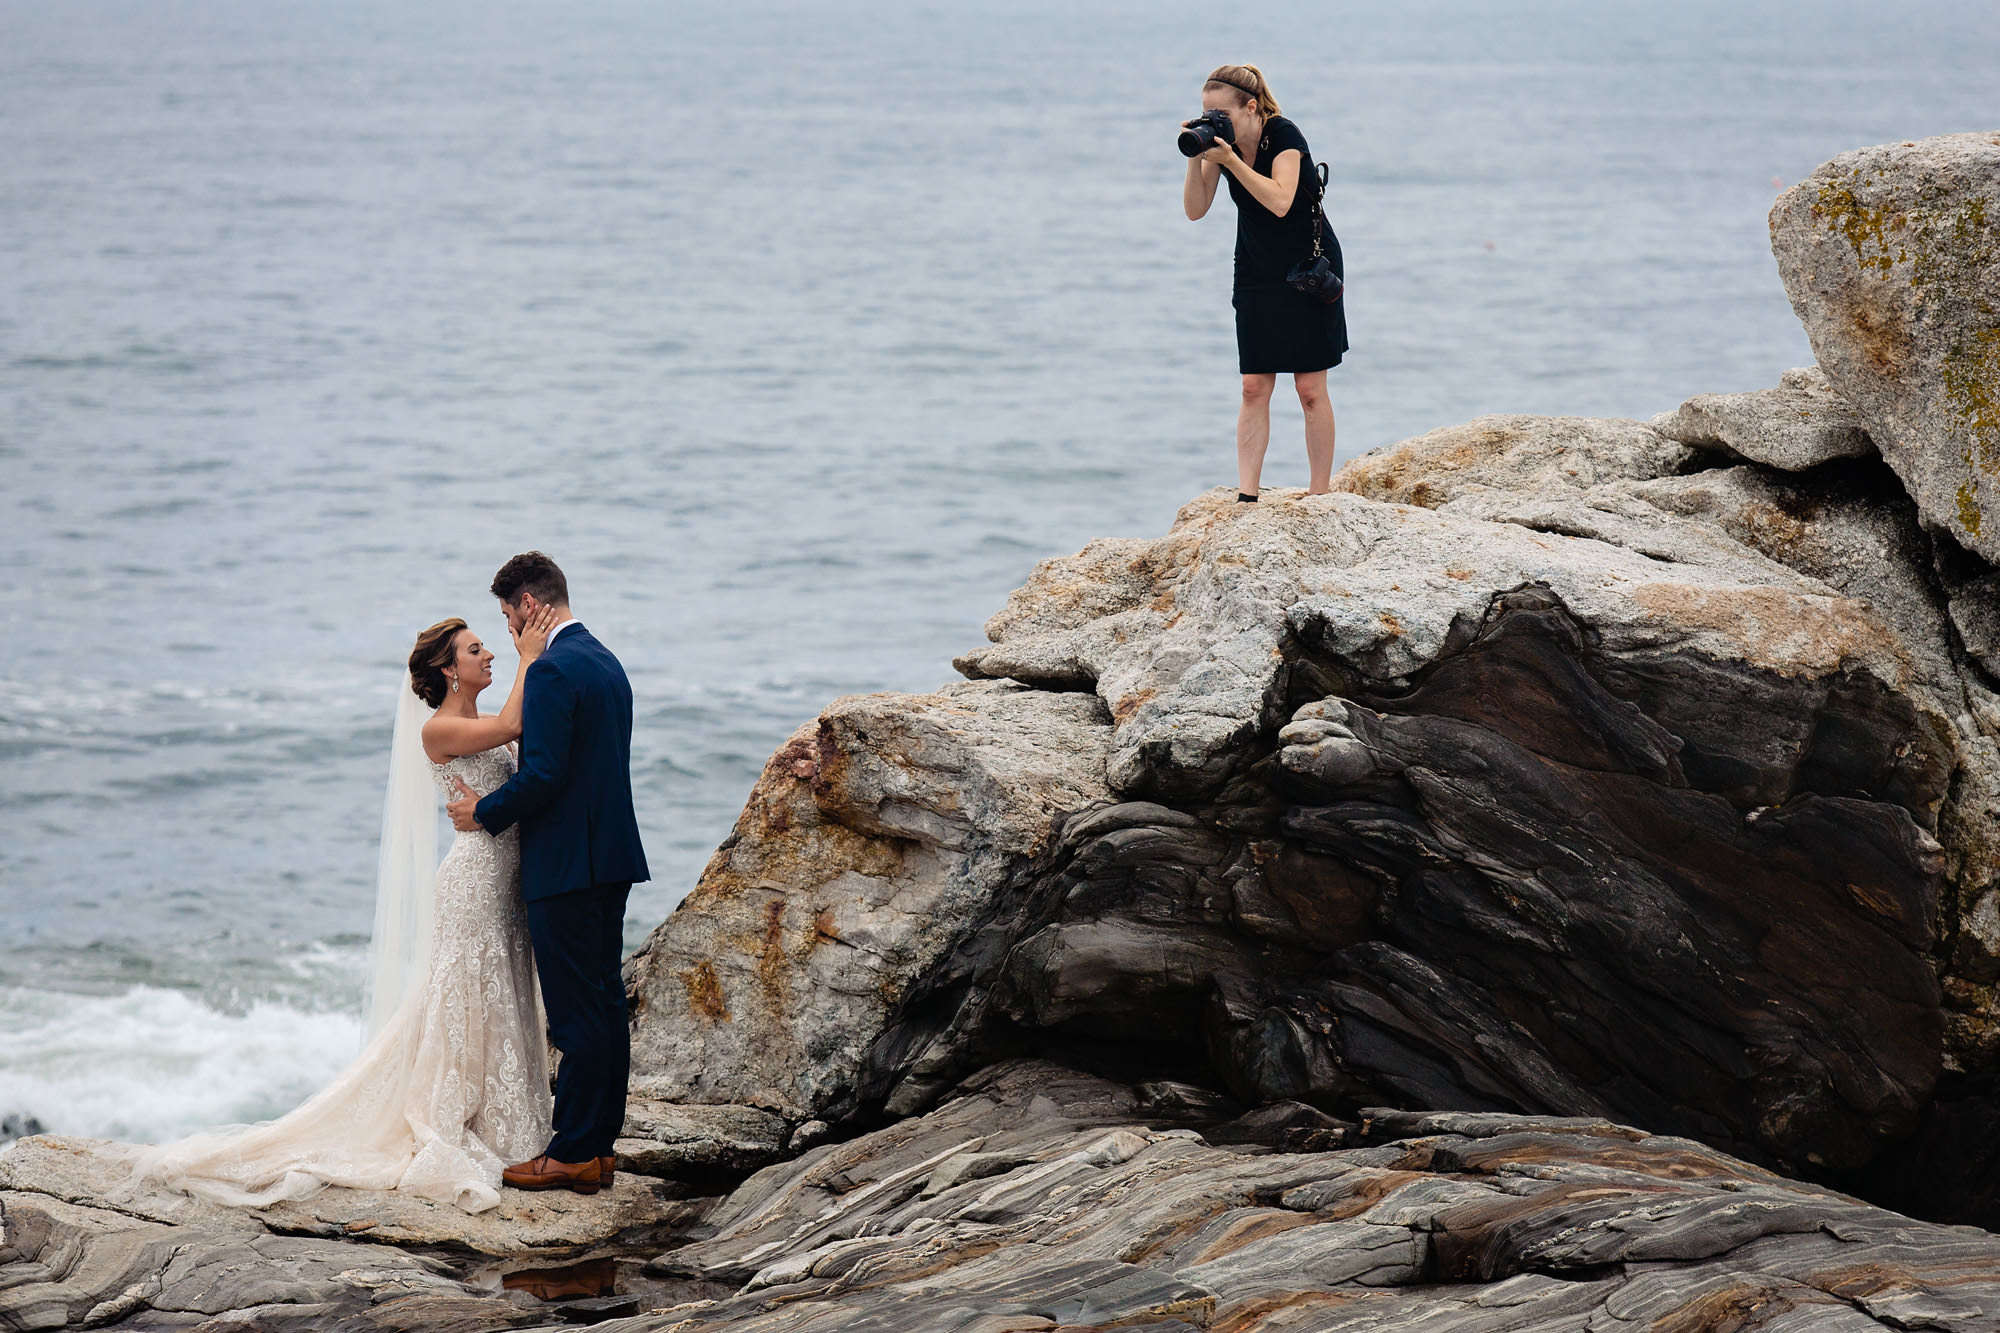 Kate Crabtree photographs a couple at a wedding at Pemaquid Point, Maine